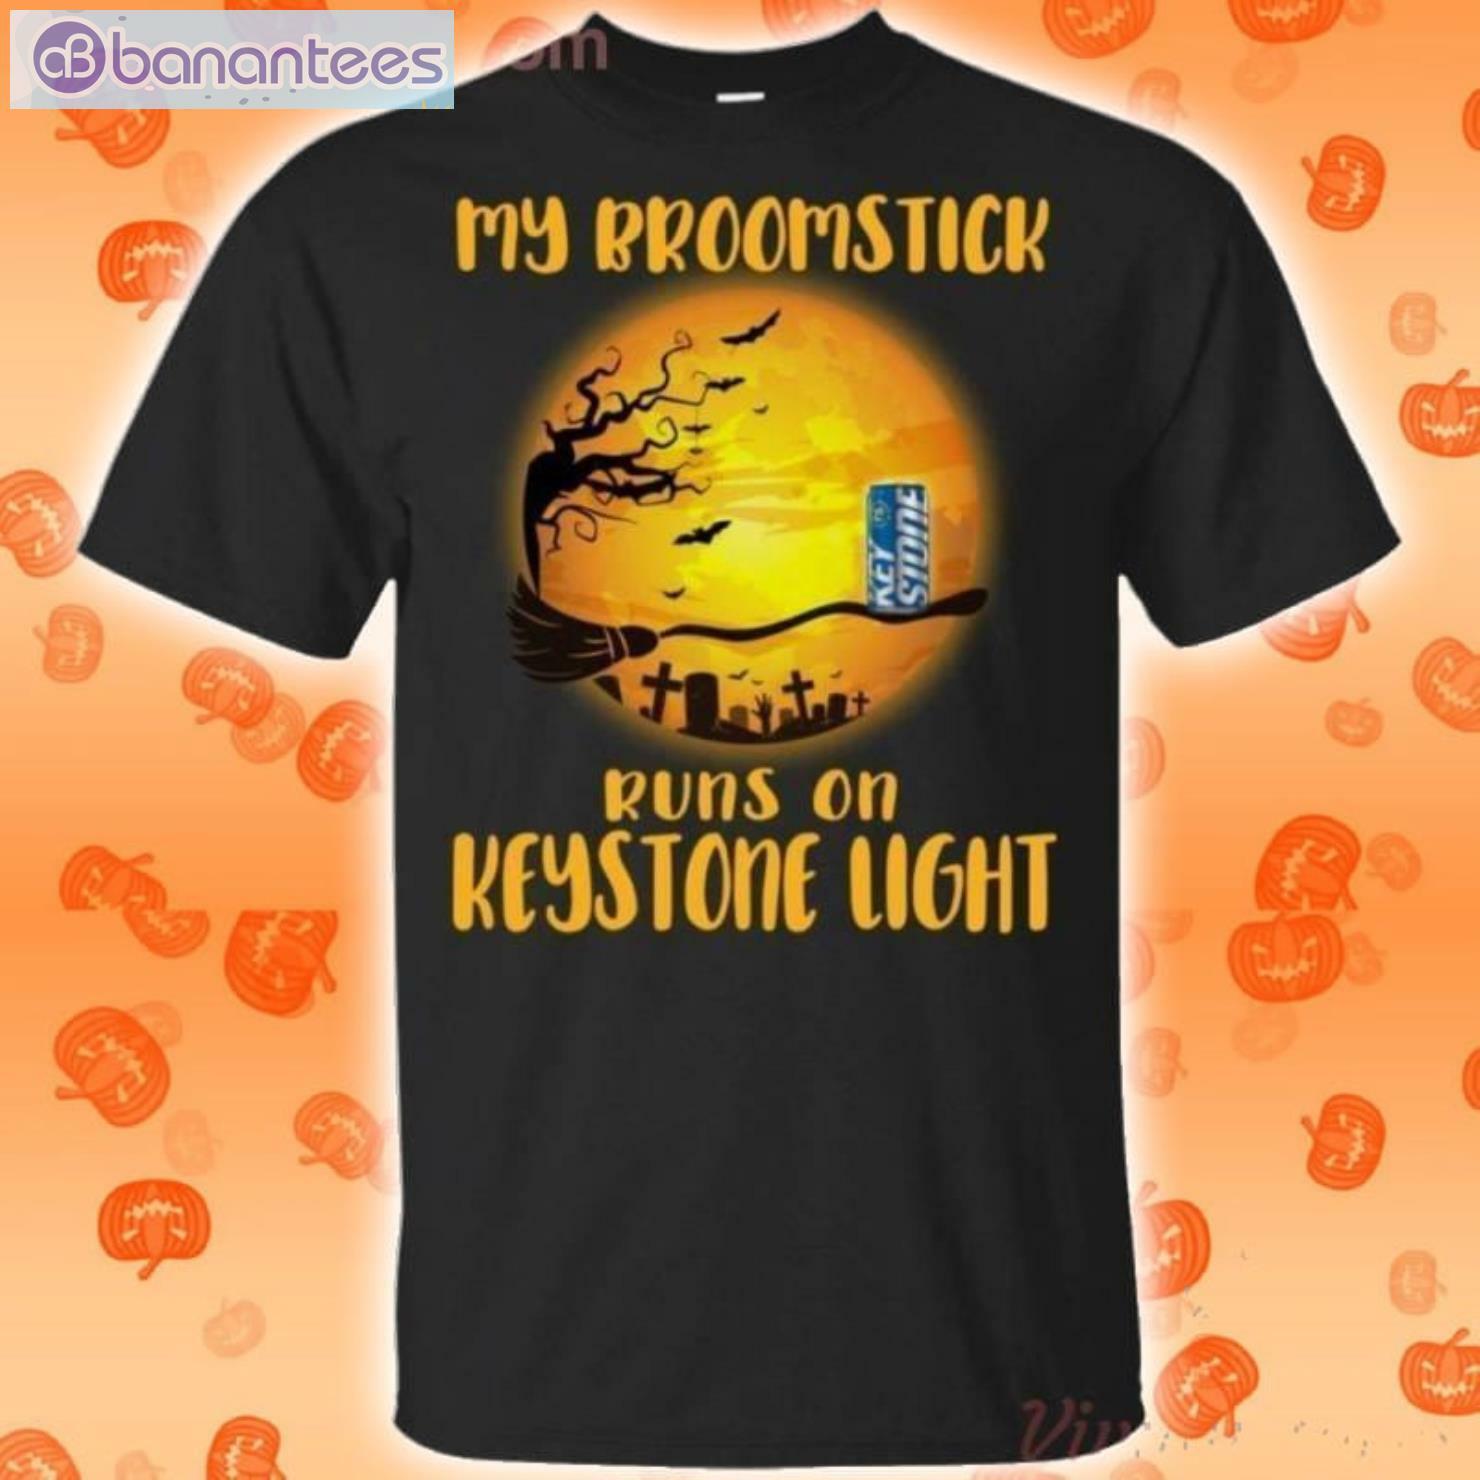 My Broomstick Runs On Keystone Light Funny Beer Halloween T-Shirt Product Photo 1 Product photo 1